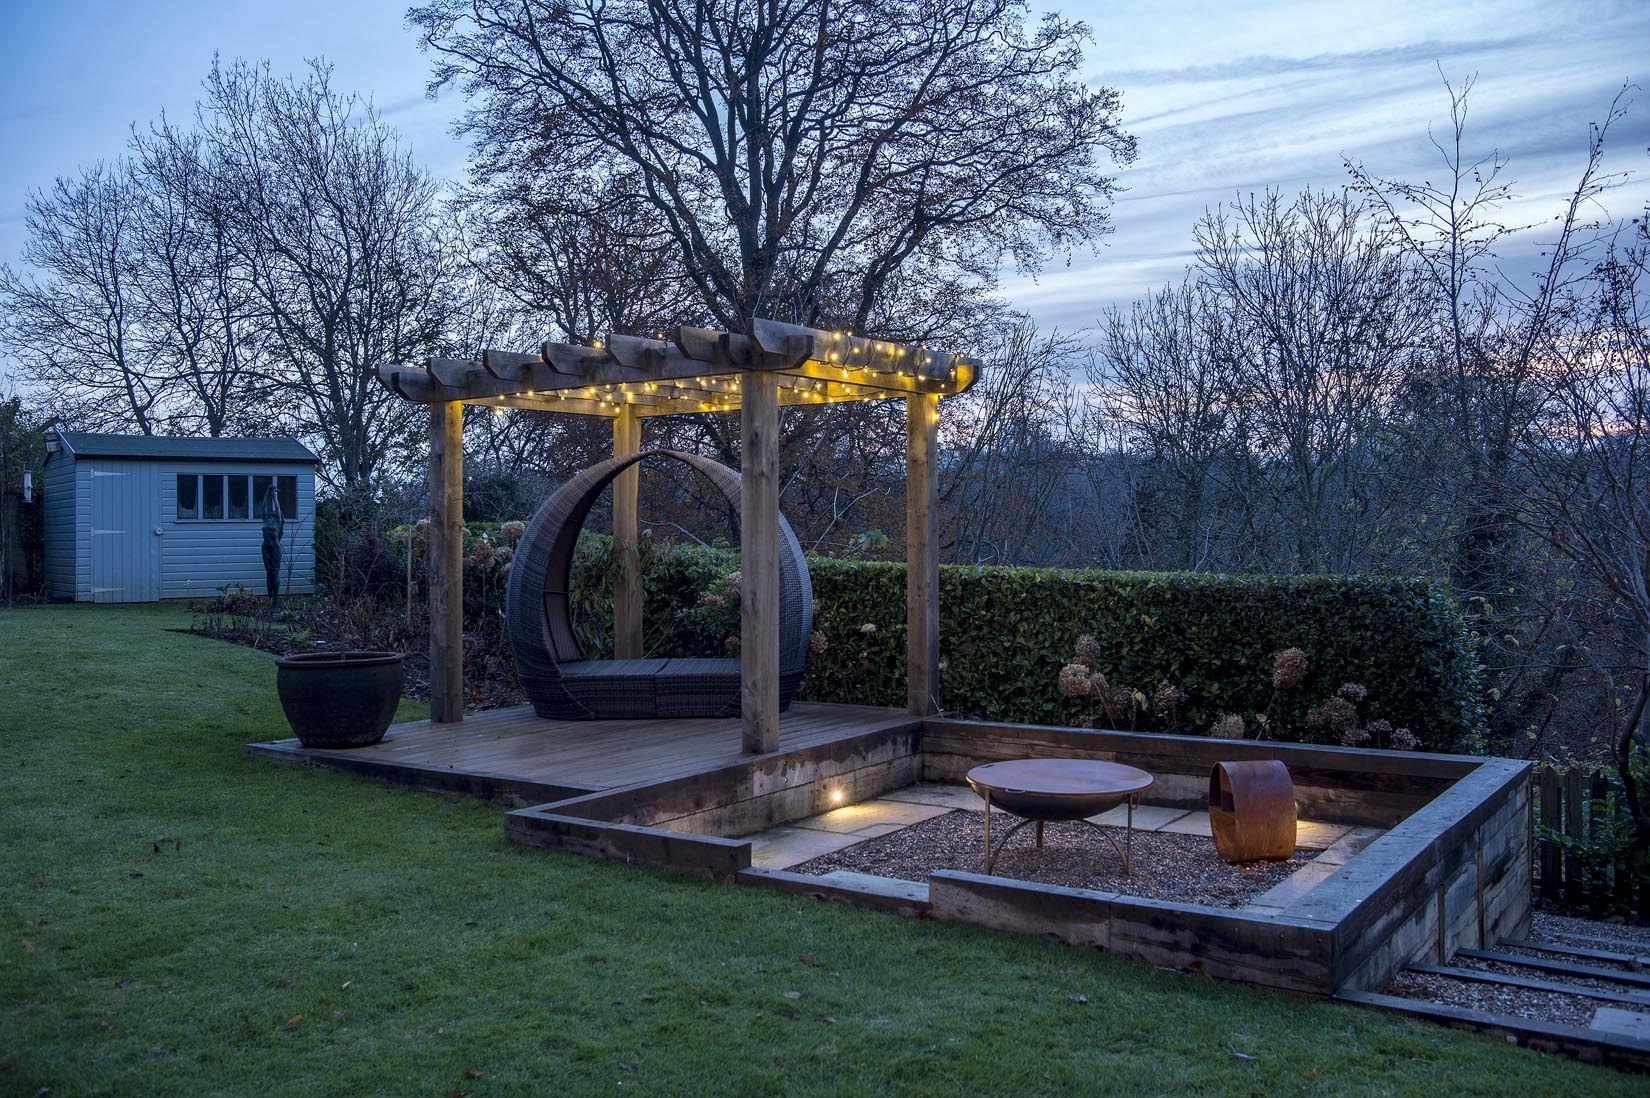 New seating area with oak pergola and lighting